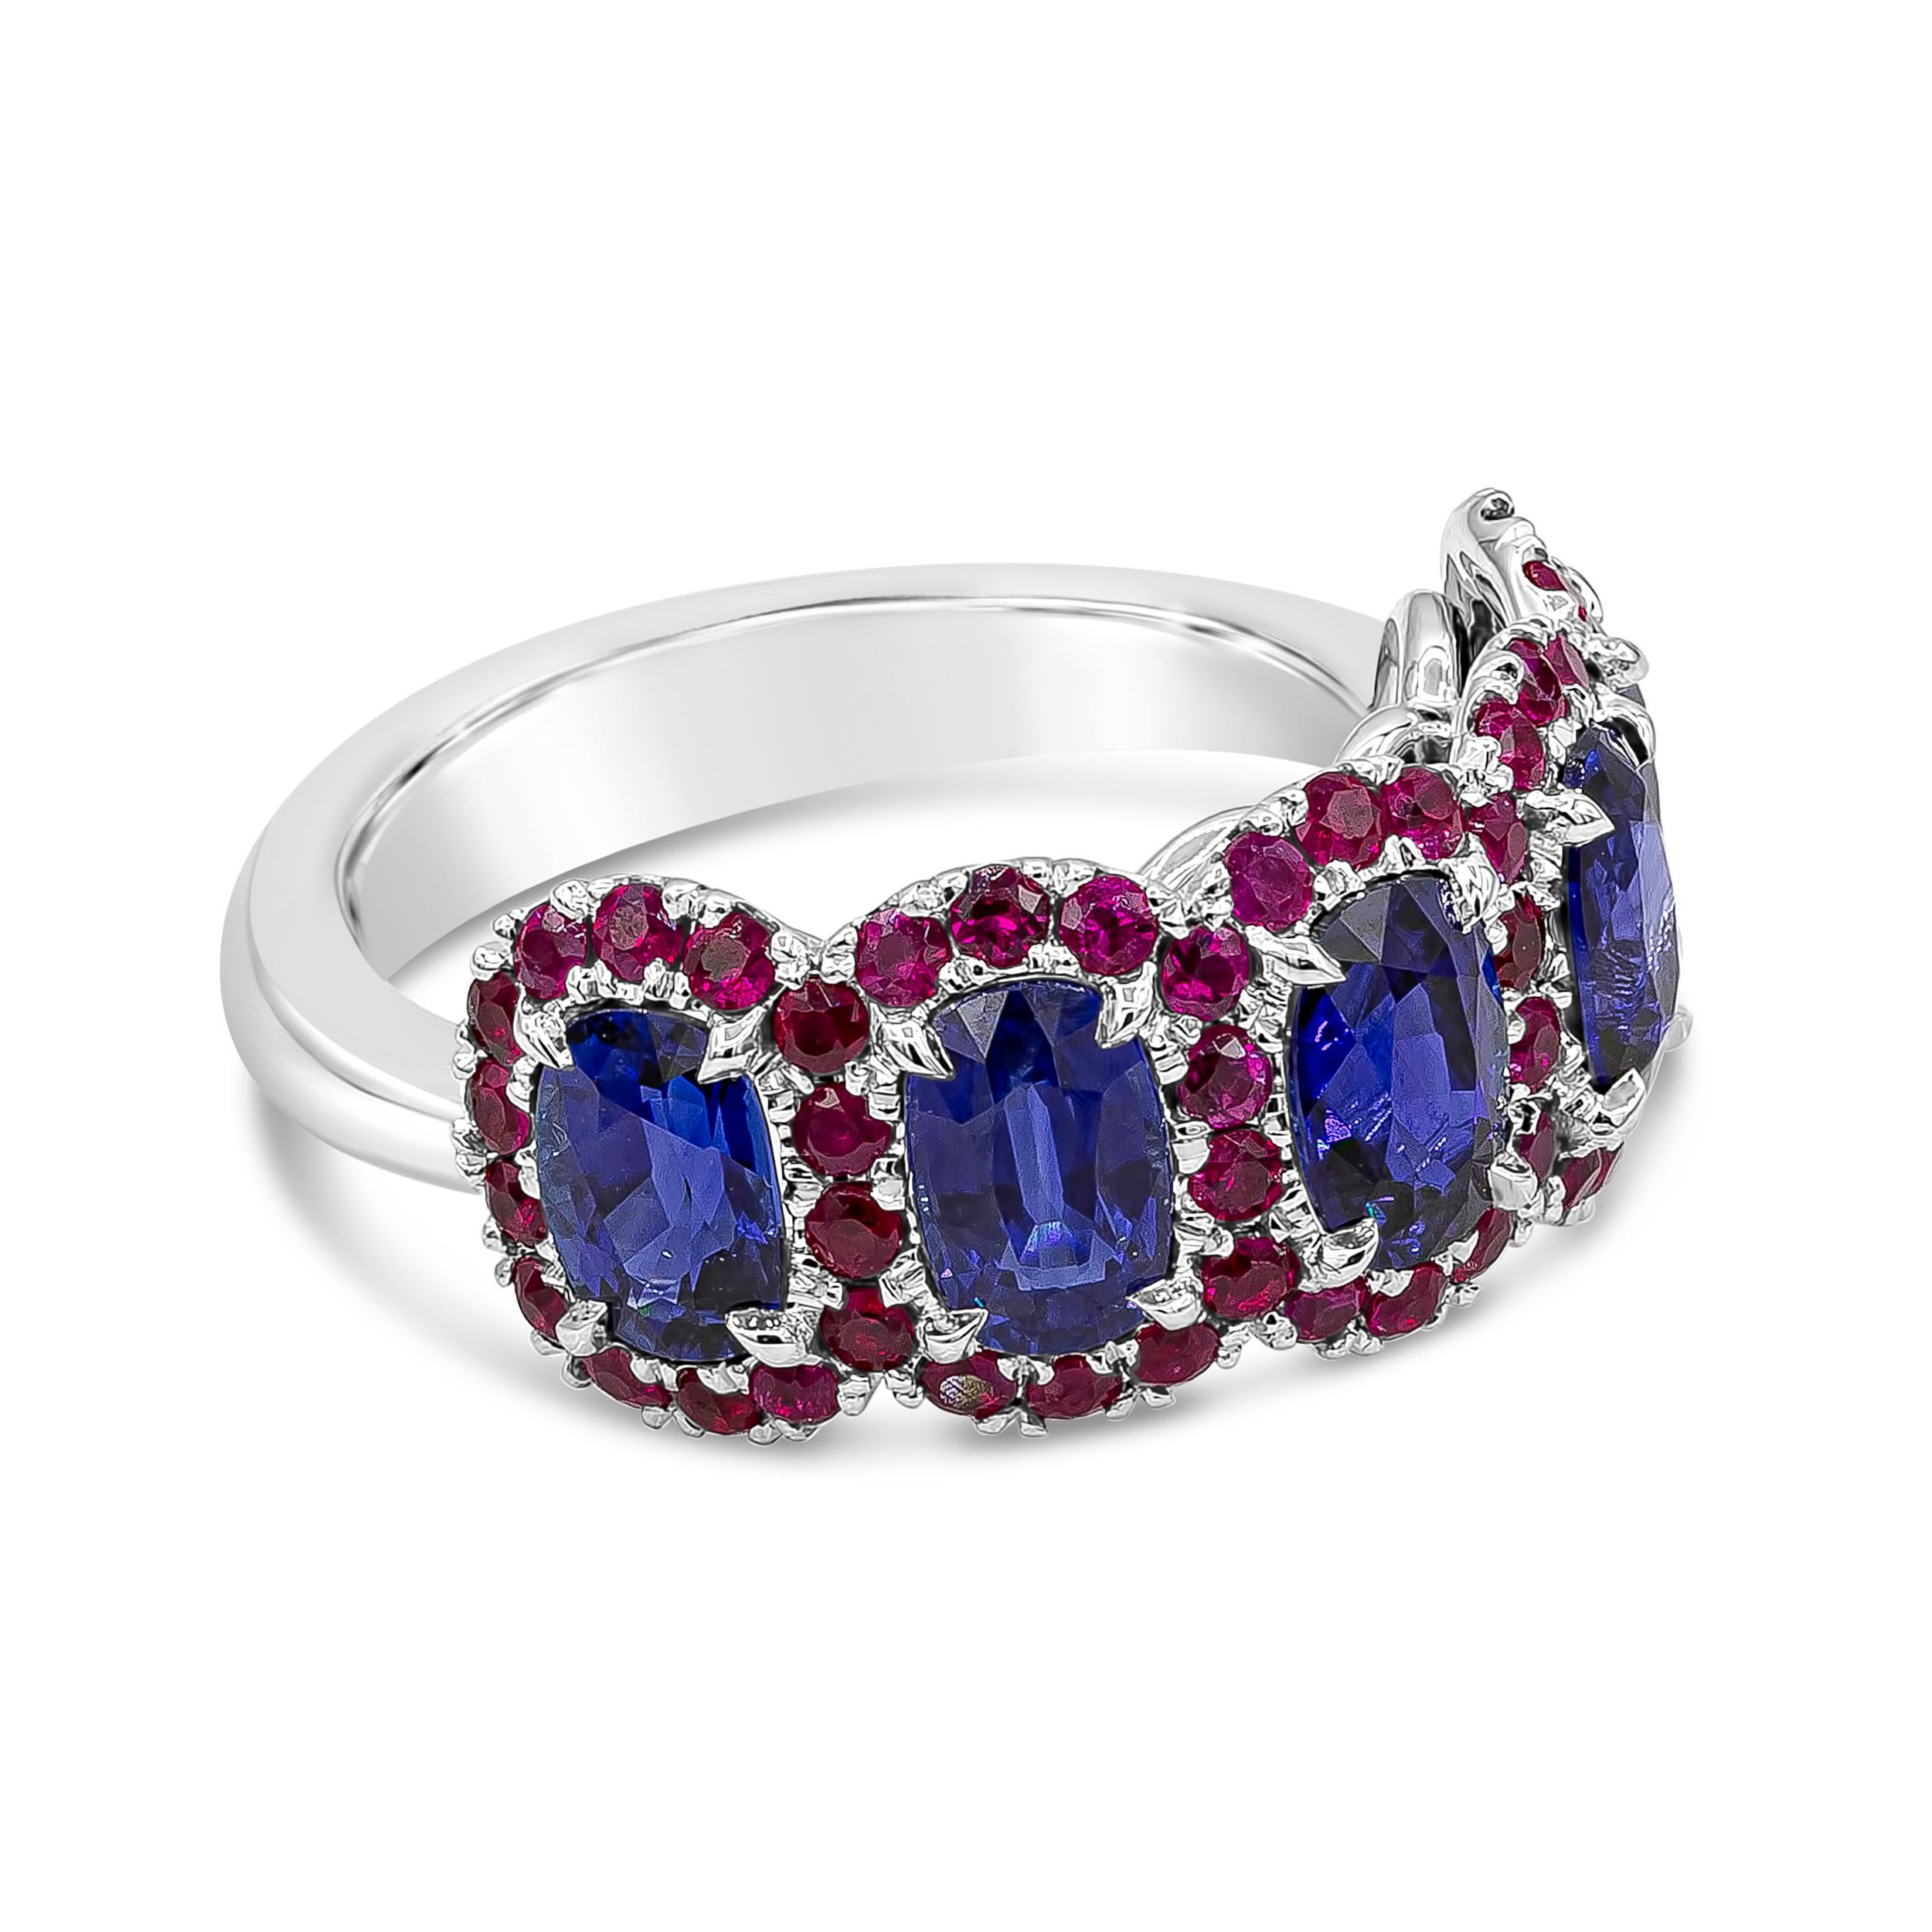 Showcasing five elongated cushion cut blue sapphires weighing 3.18 carats total. Each surrounded by a row of color-rich vibrant rubies weighing 1.08 carats total. Made with 18K White Gold 

Style available in different price ranges. Prices are based